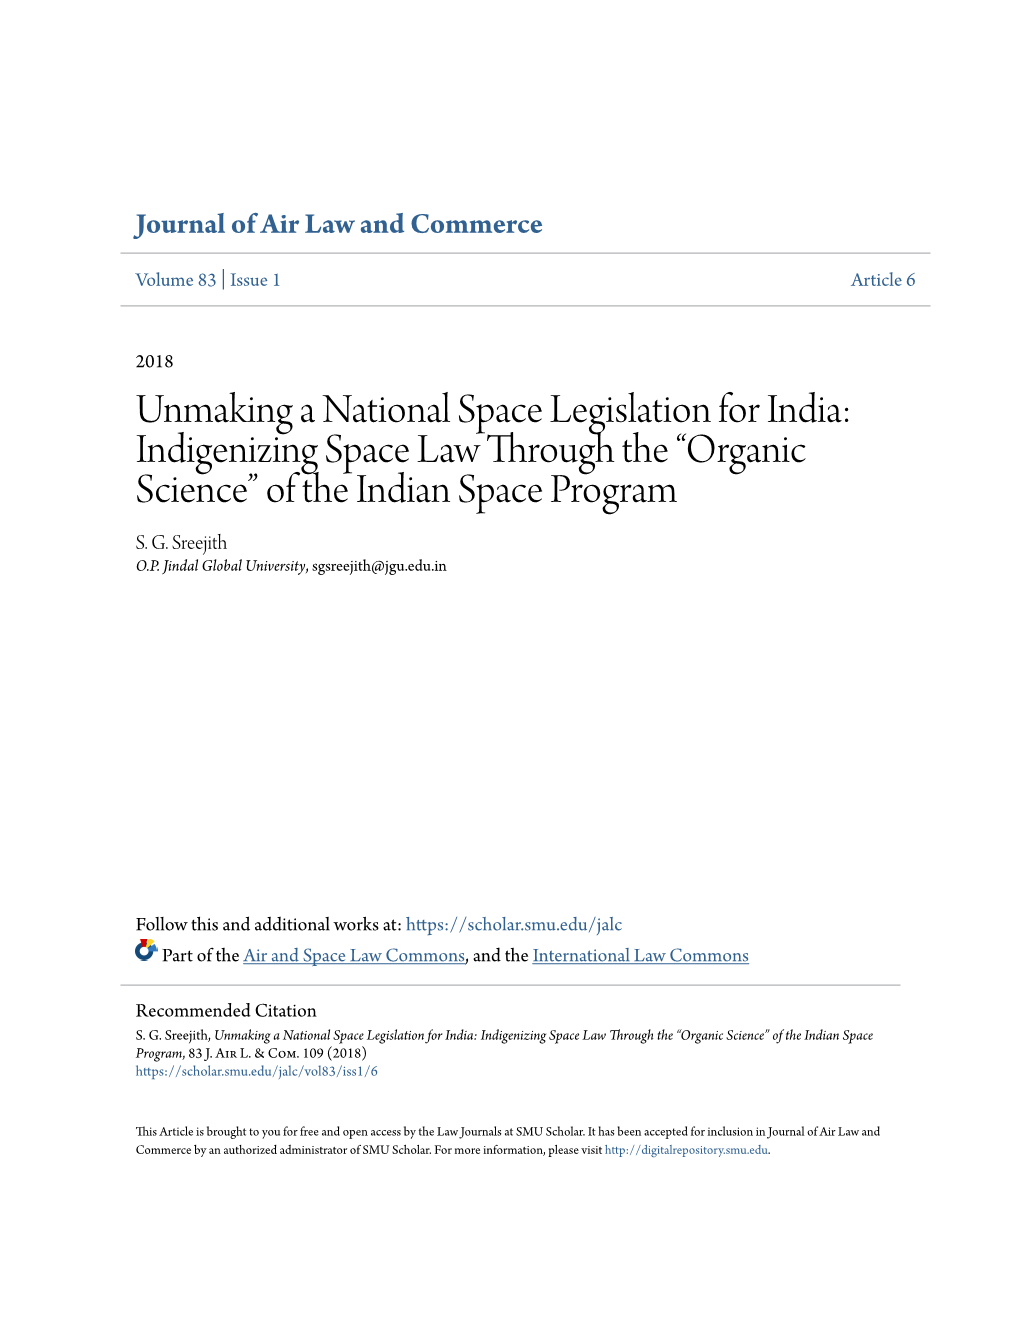 Unmaking a National Space Legislation for India: Indigenizing Space Law Through the “Organic Science” of the Indian Space Program S